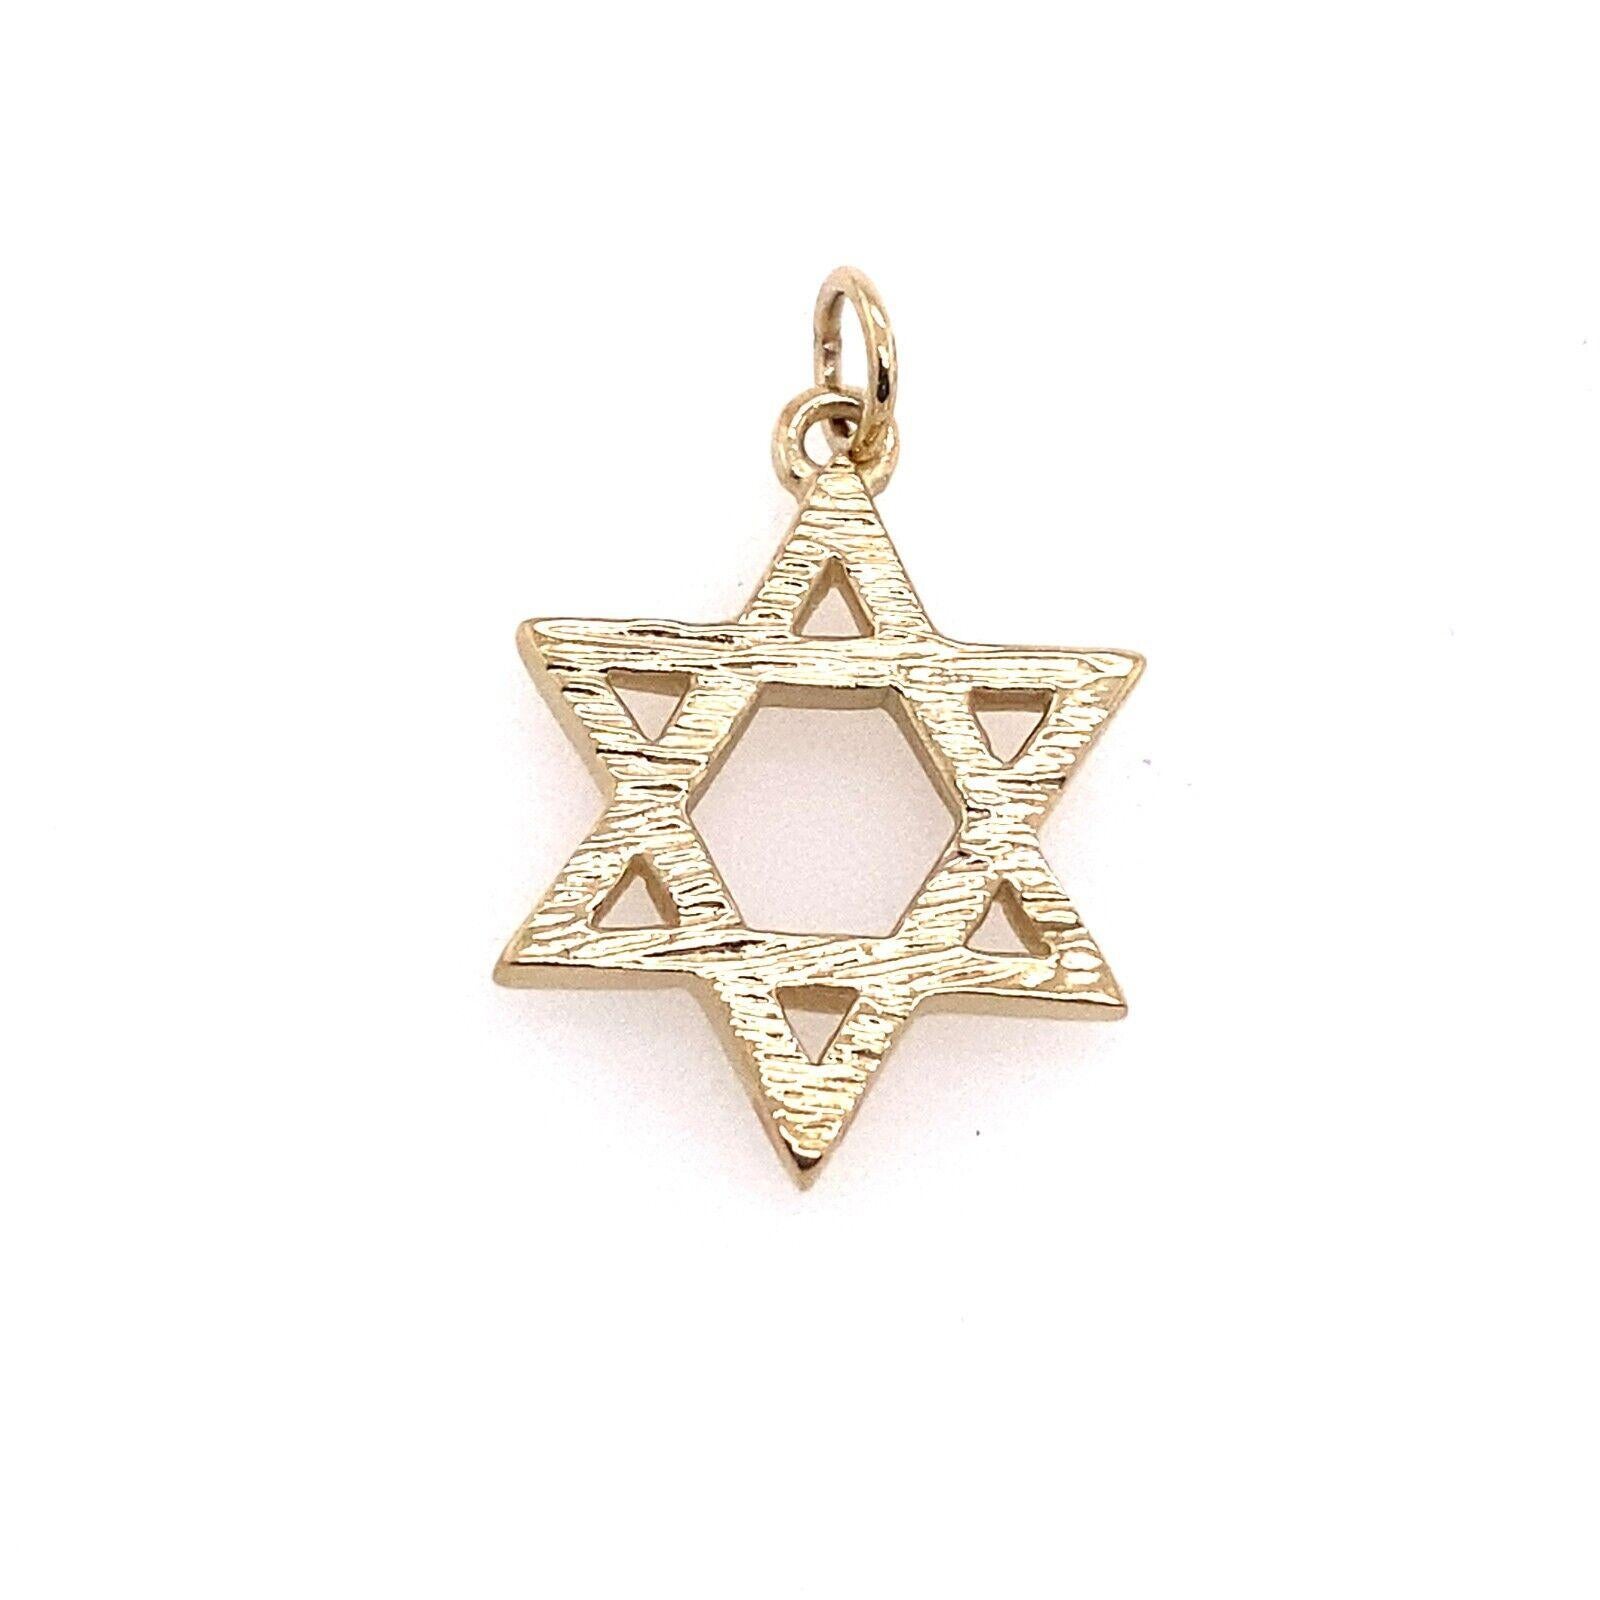 This 9ct Solid Yellow Gold Star of David pendant features a high shine finish on one side and a bark finish on the reverse side, with 9ct jump ring The pendant is 17.94mm in diameter and weighs 3.1g and is an ideal gift for any occasion.